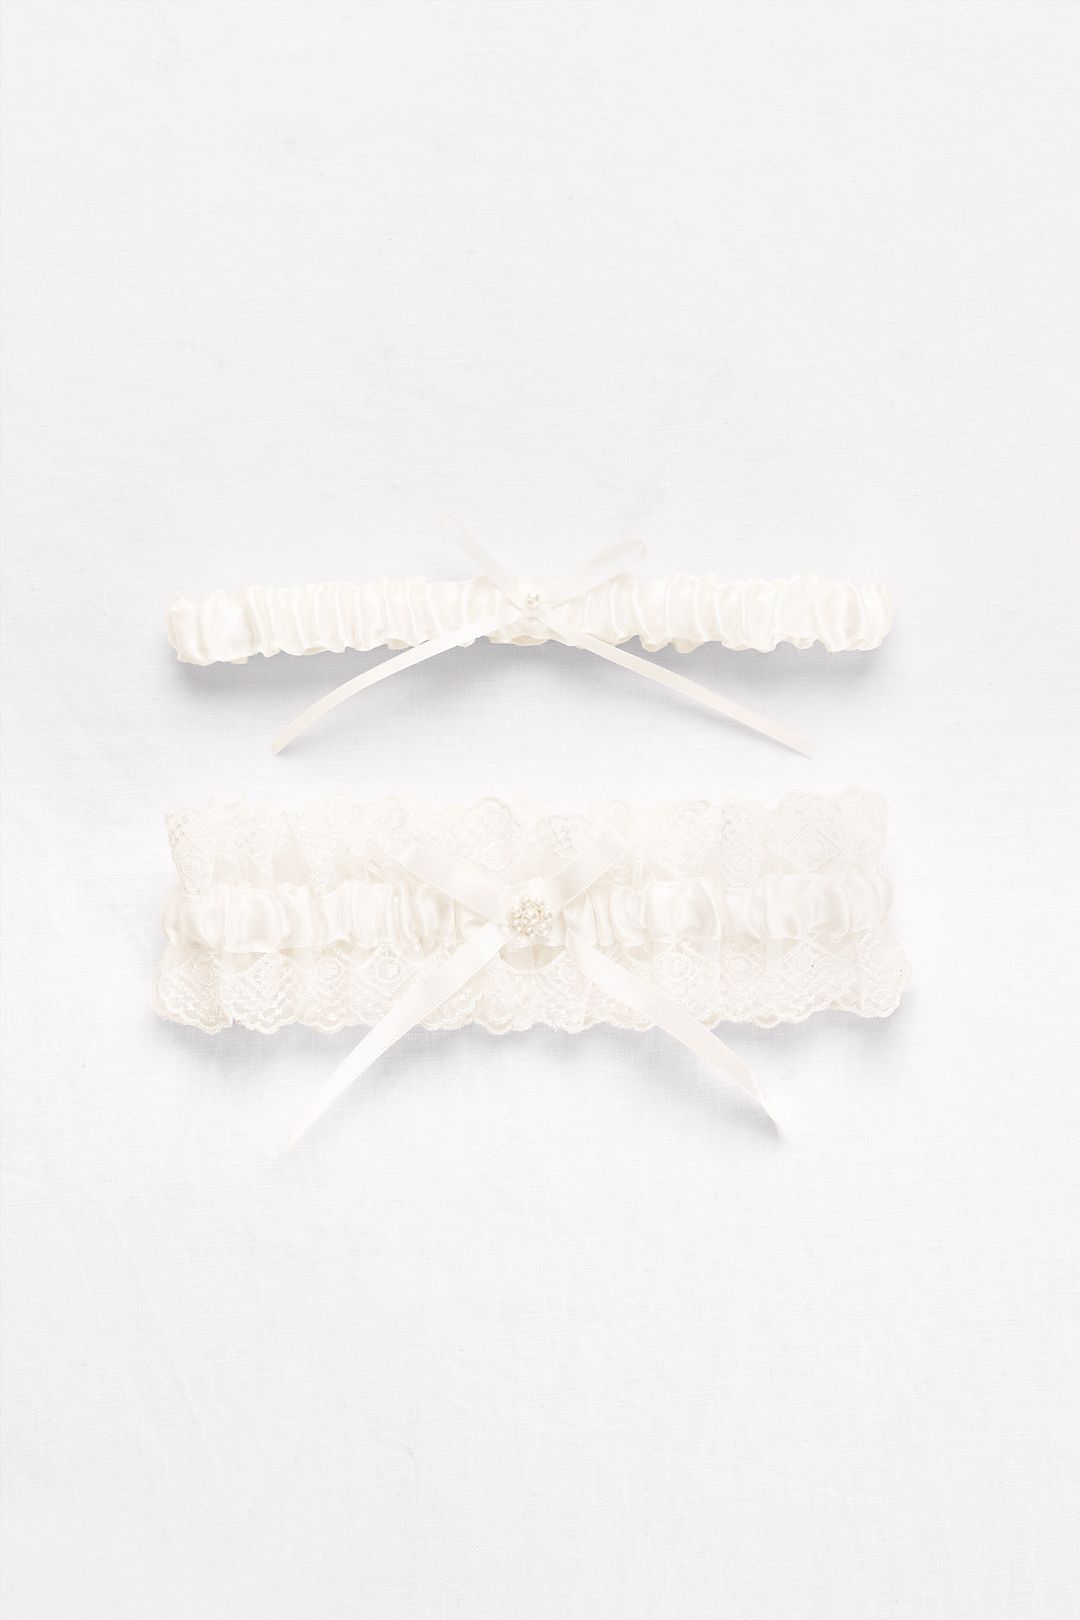 Ruffled Lace and Pearl Garter Set with Ribbon Bows Image 3